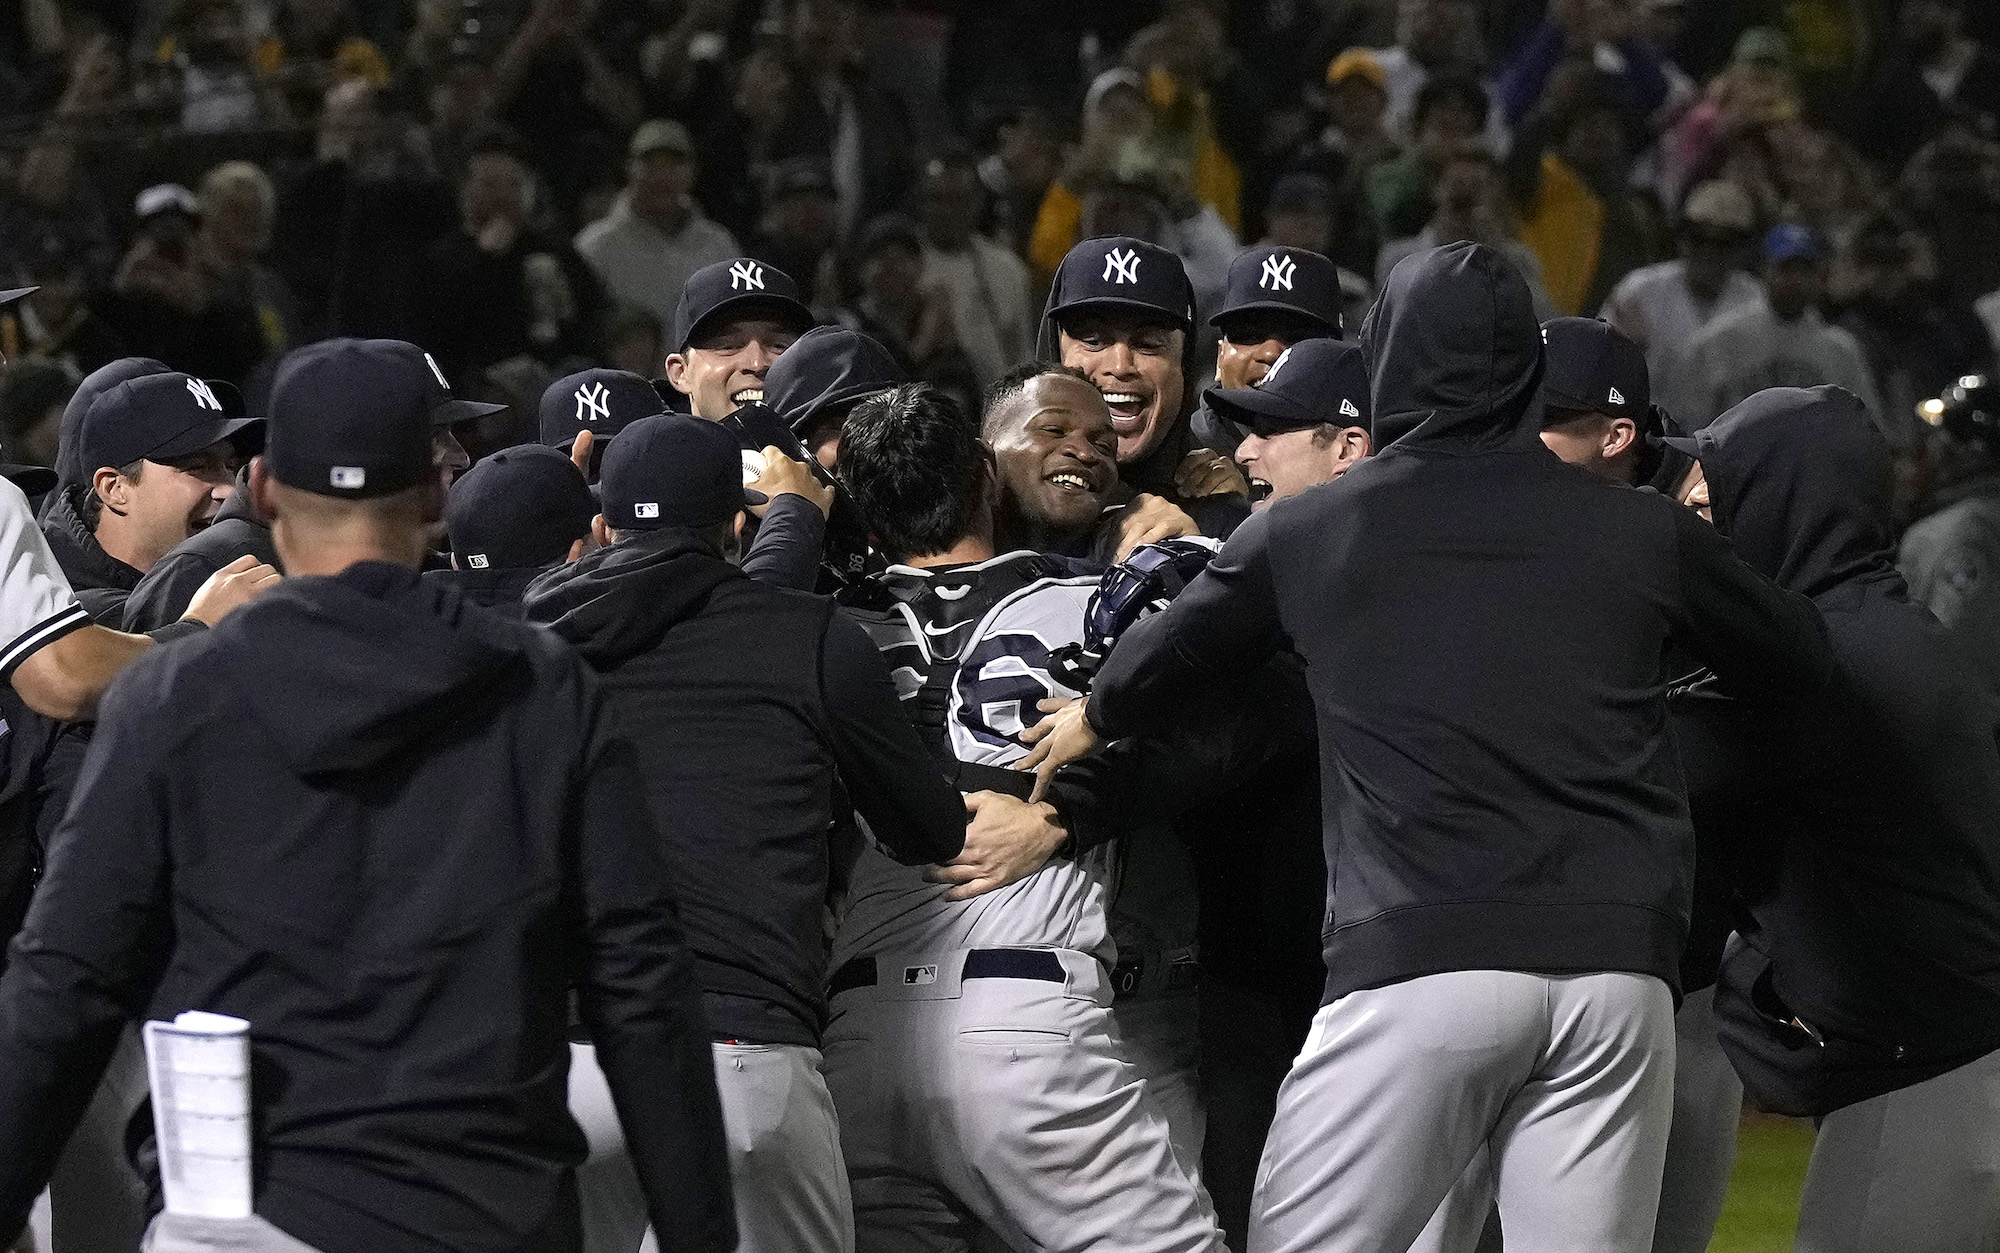 OAKLAND, CALIFORNIA - JUNE 28: Domingo German #0 of the New York Yankees celebrates his no-hit perfect game against the Oakland Athletics, defeating them 11-0 at RingCentral Coliseum on June 28, 2023 in Oakland, California. (Photo by Thearon W. Henderson/Getty Images)